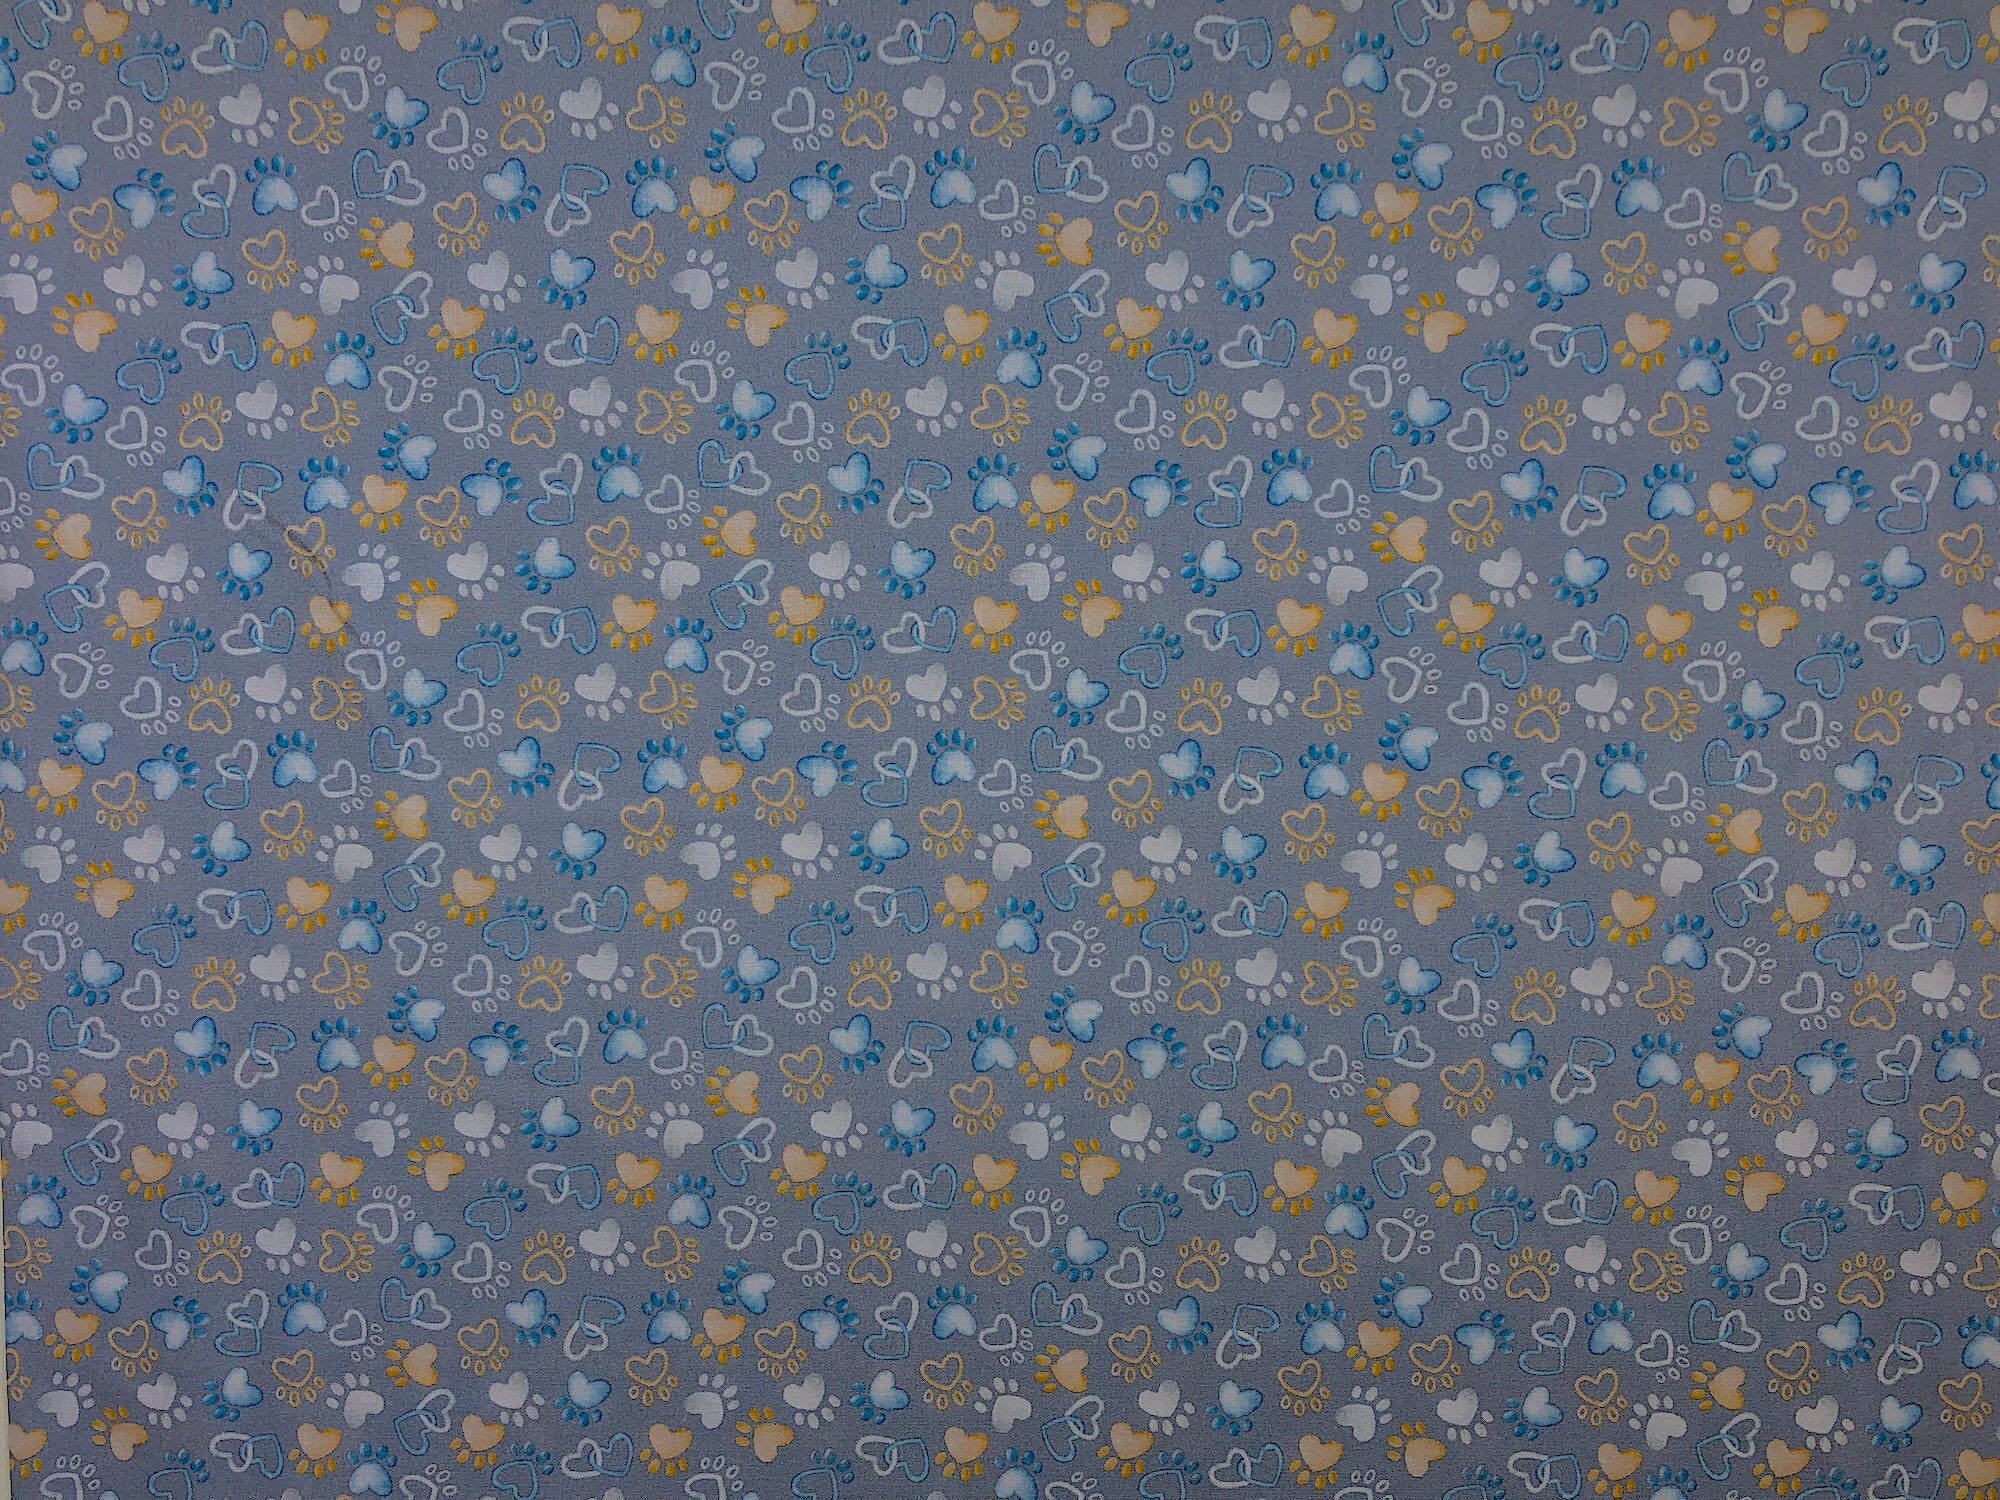 White, Blue and yellow paw prints and hearts cover this grey fabric. This fabric is part of the Think Pawsitive Collection designed by Andi Metz